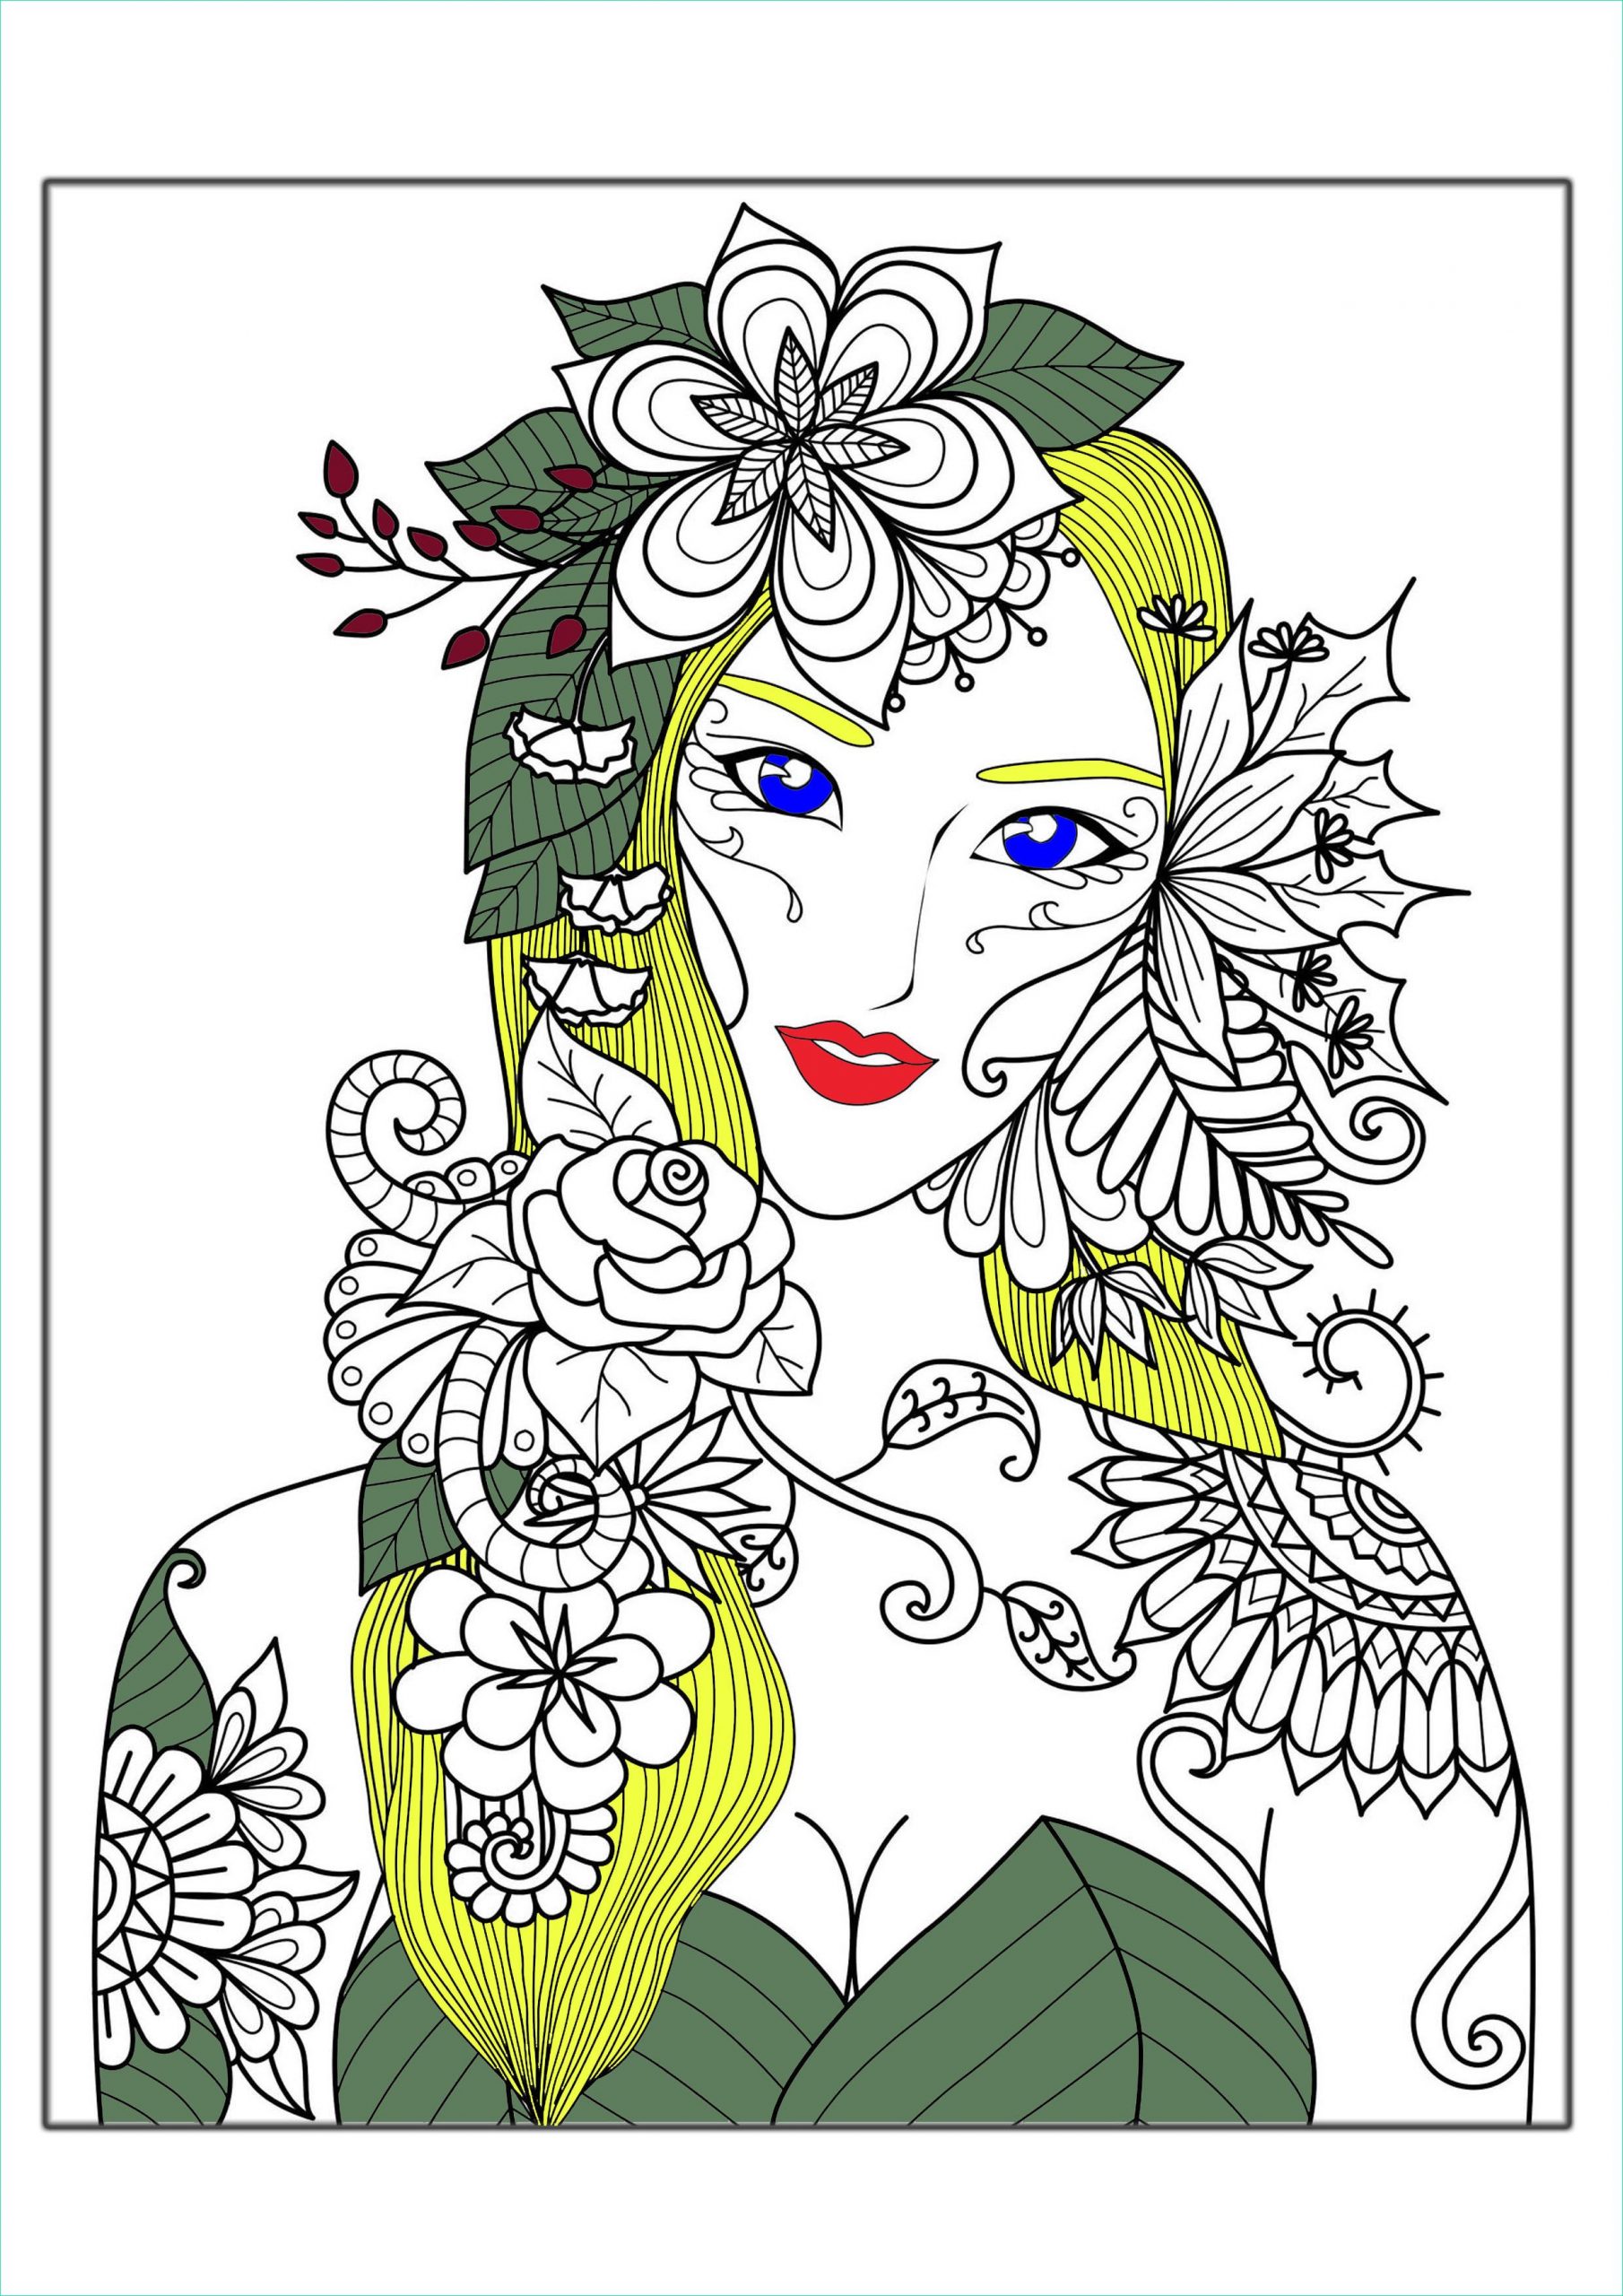 Coloriage Pour Adulte Anti Stress Luxe Photographie Femme Bouddhiste Coloriage Anti Stress